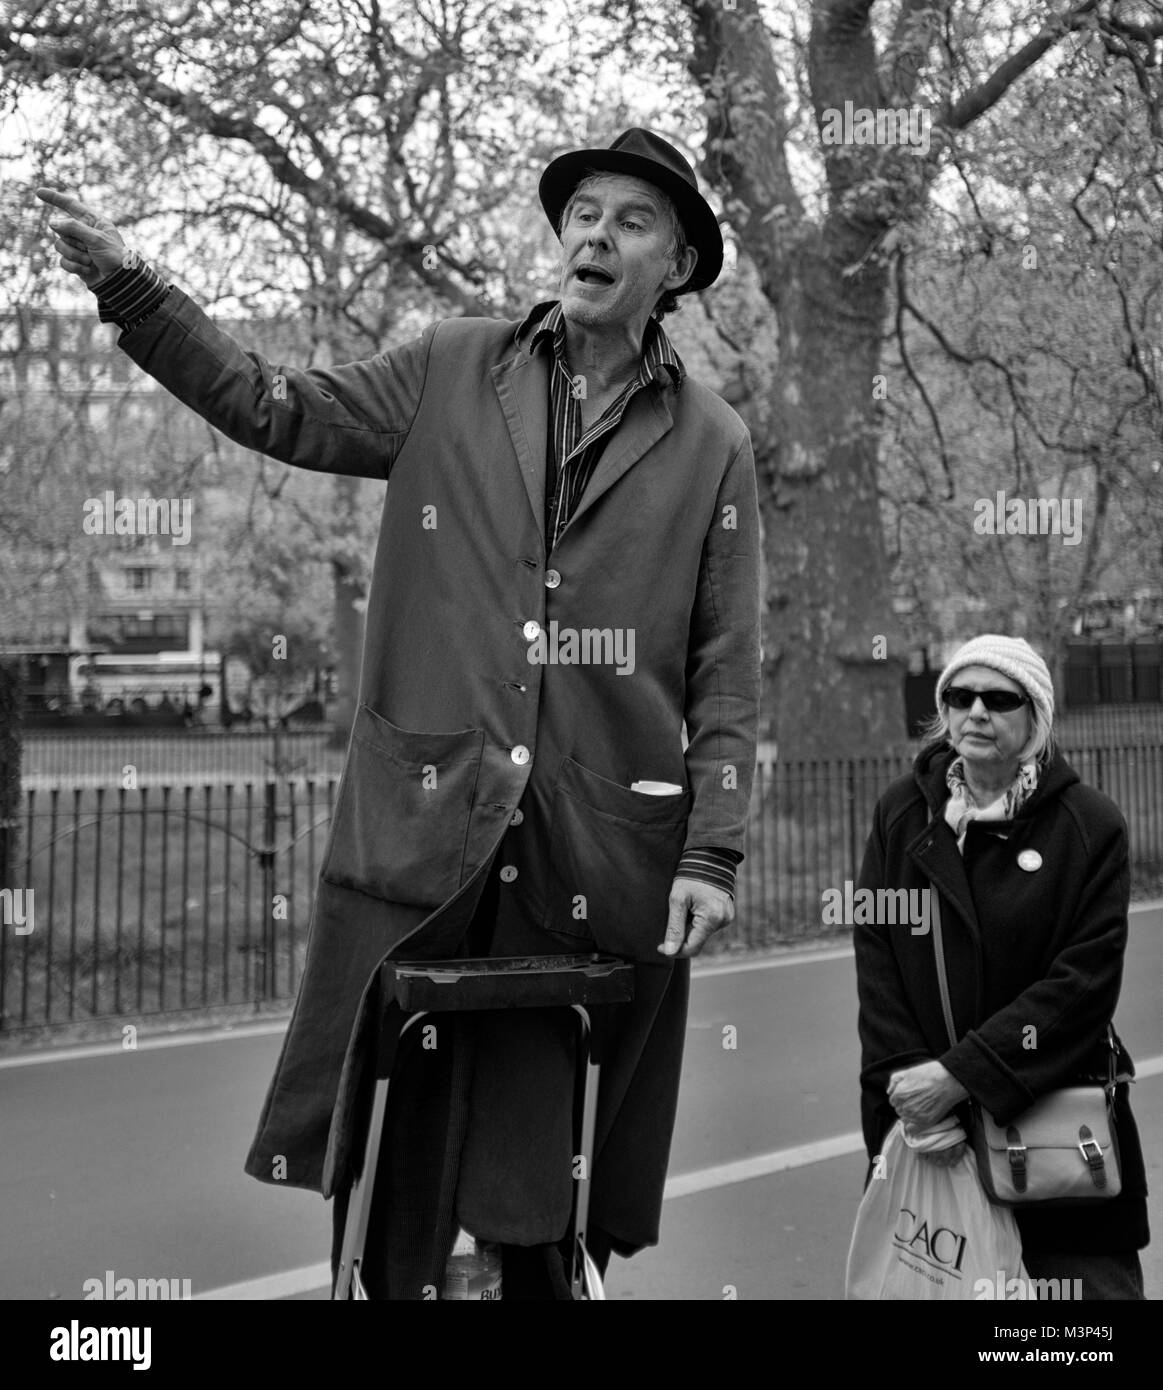 Black & White Photograph of a man standing on a podium at Speakers Corner, Hyde Park, London, England, UK. Credit: London Snapper Stock Photo